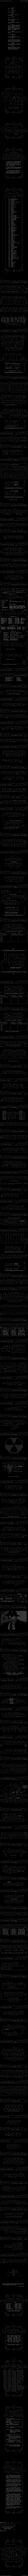 To Serve Man ASCII Collection by Hiro Protagonist